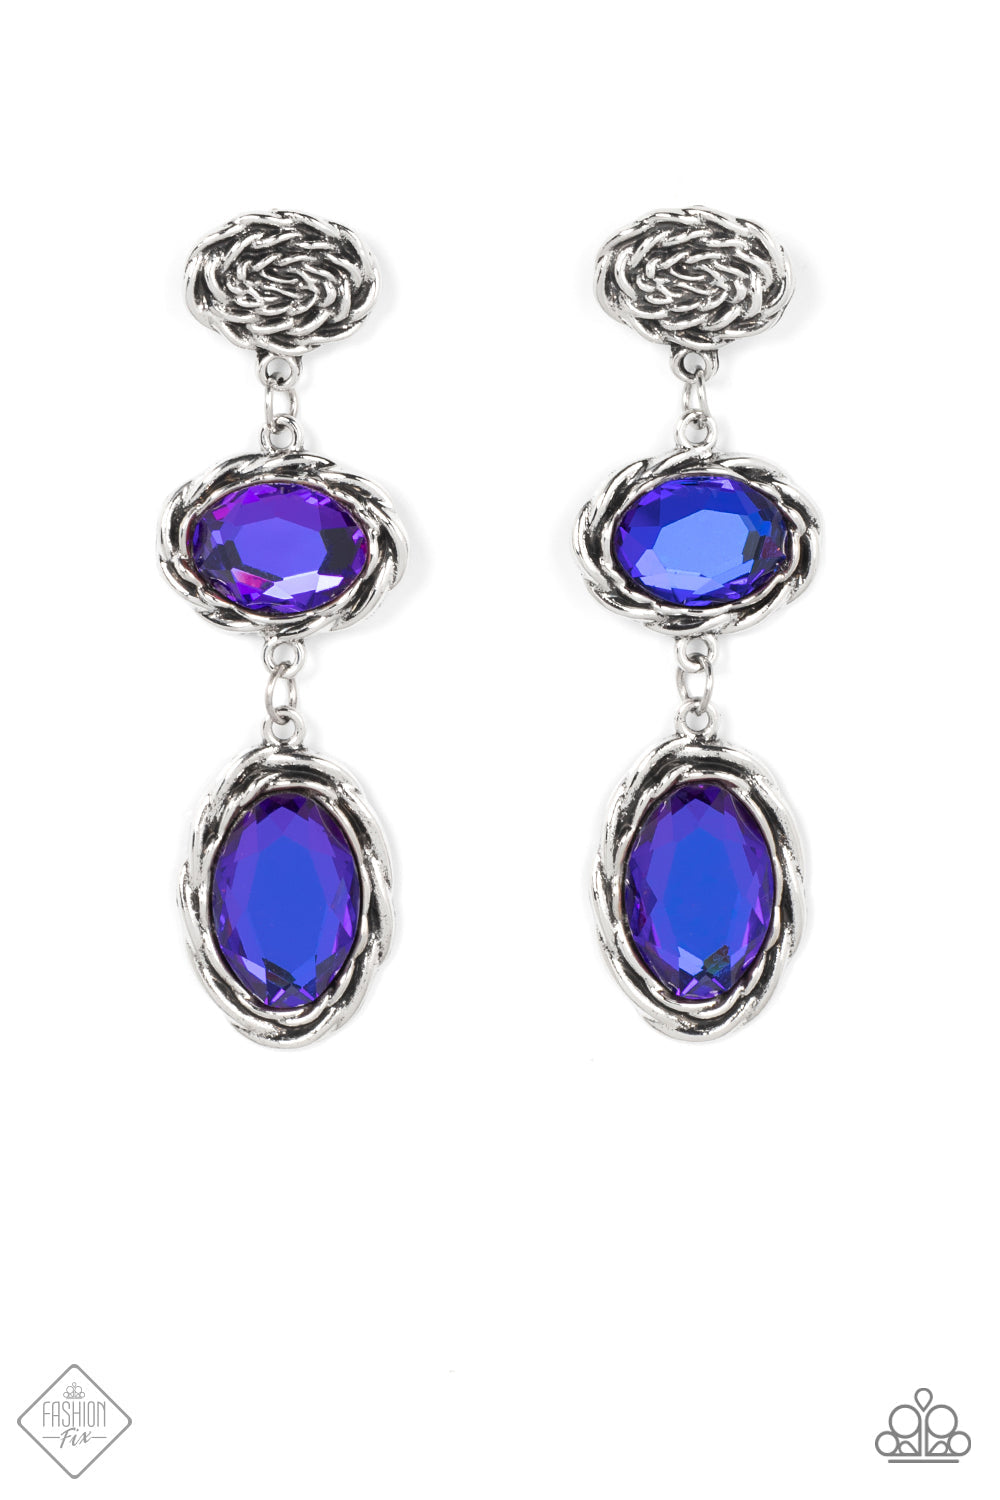 Majestic Muse - Colorful Purple Gem Fashion Earrings - Paparazzi Accessories - A coil of antiqued silver gives way to two oval multicolored purple gems. Brushed in a metallic-like finish, the shimmering gems are wrapped in layered frames of rustic rope texture creating an elegantly idyllic unique fashion. Earring attaches to a standard post fitting. 